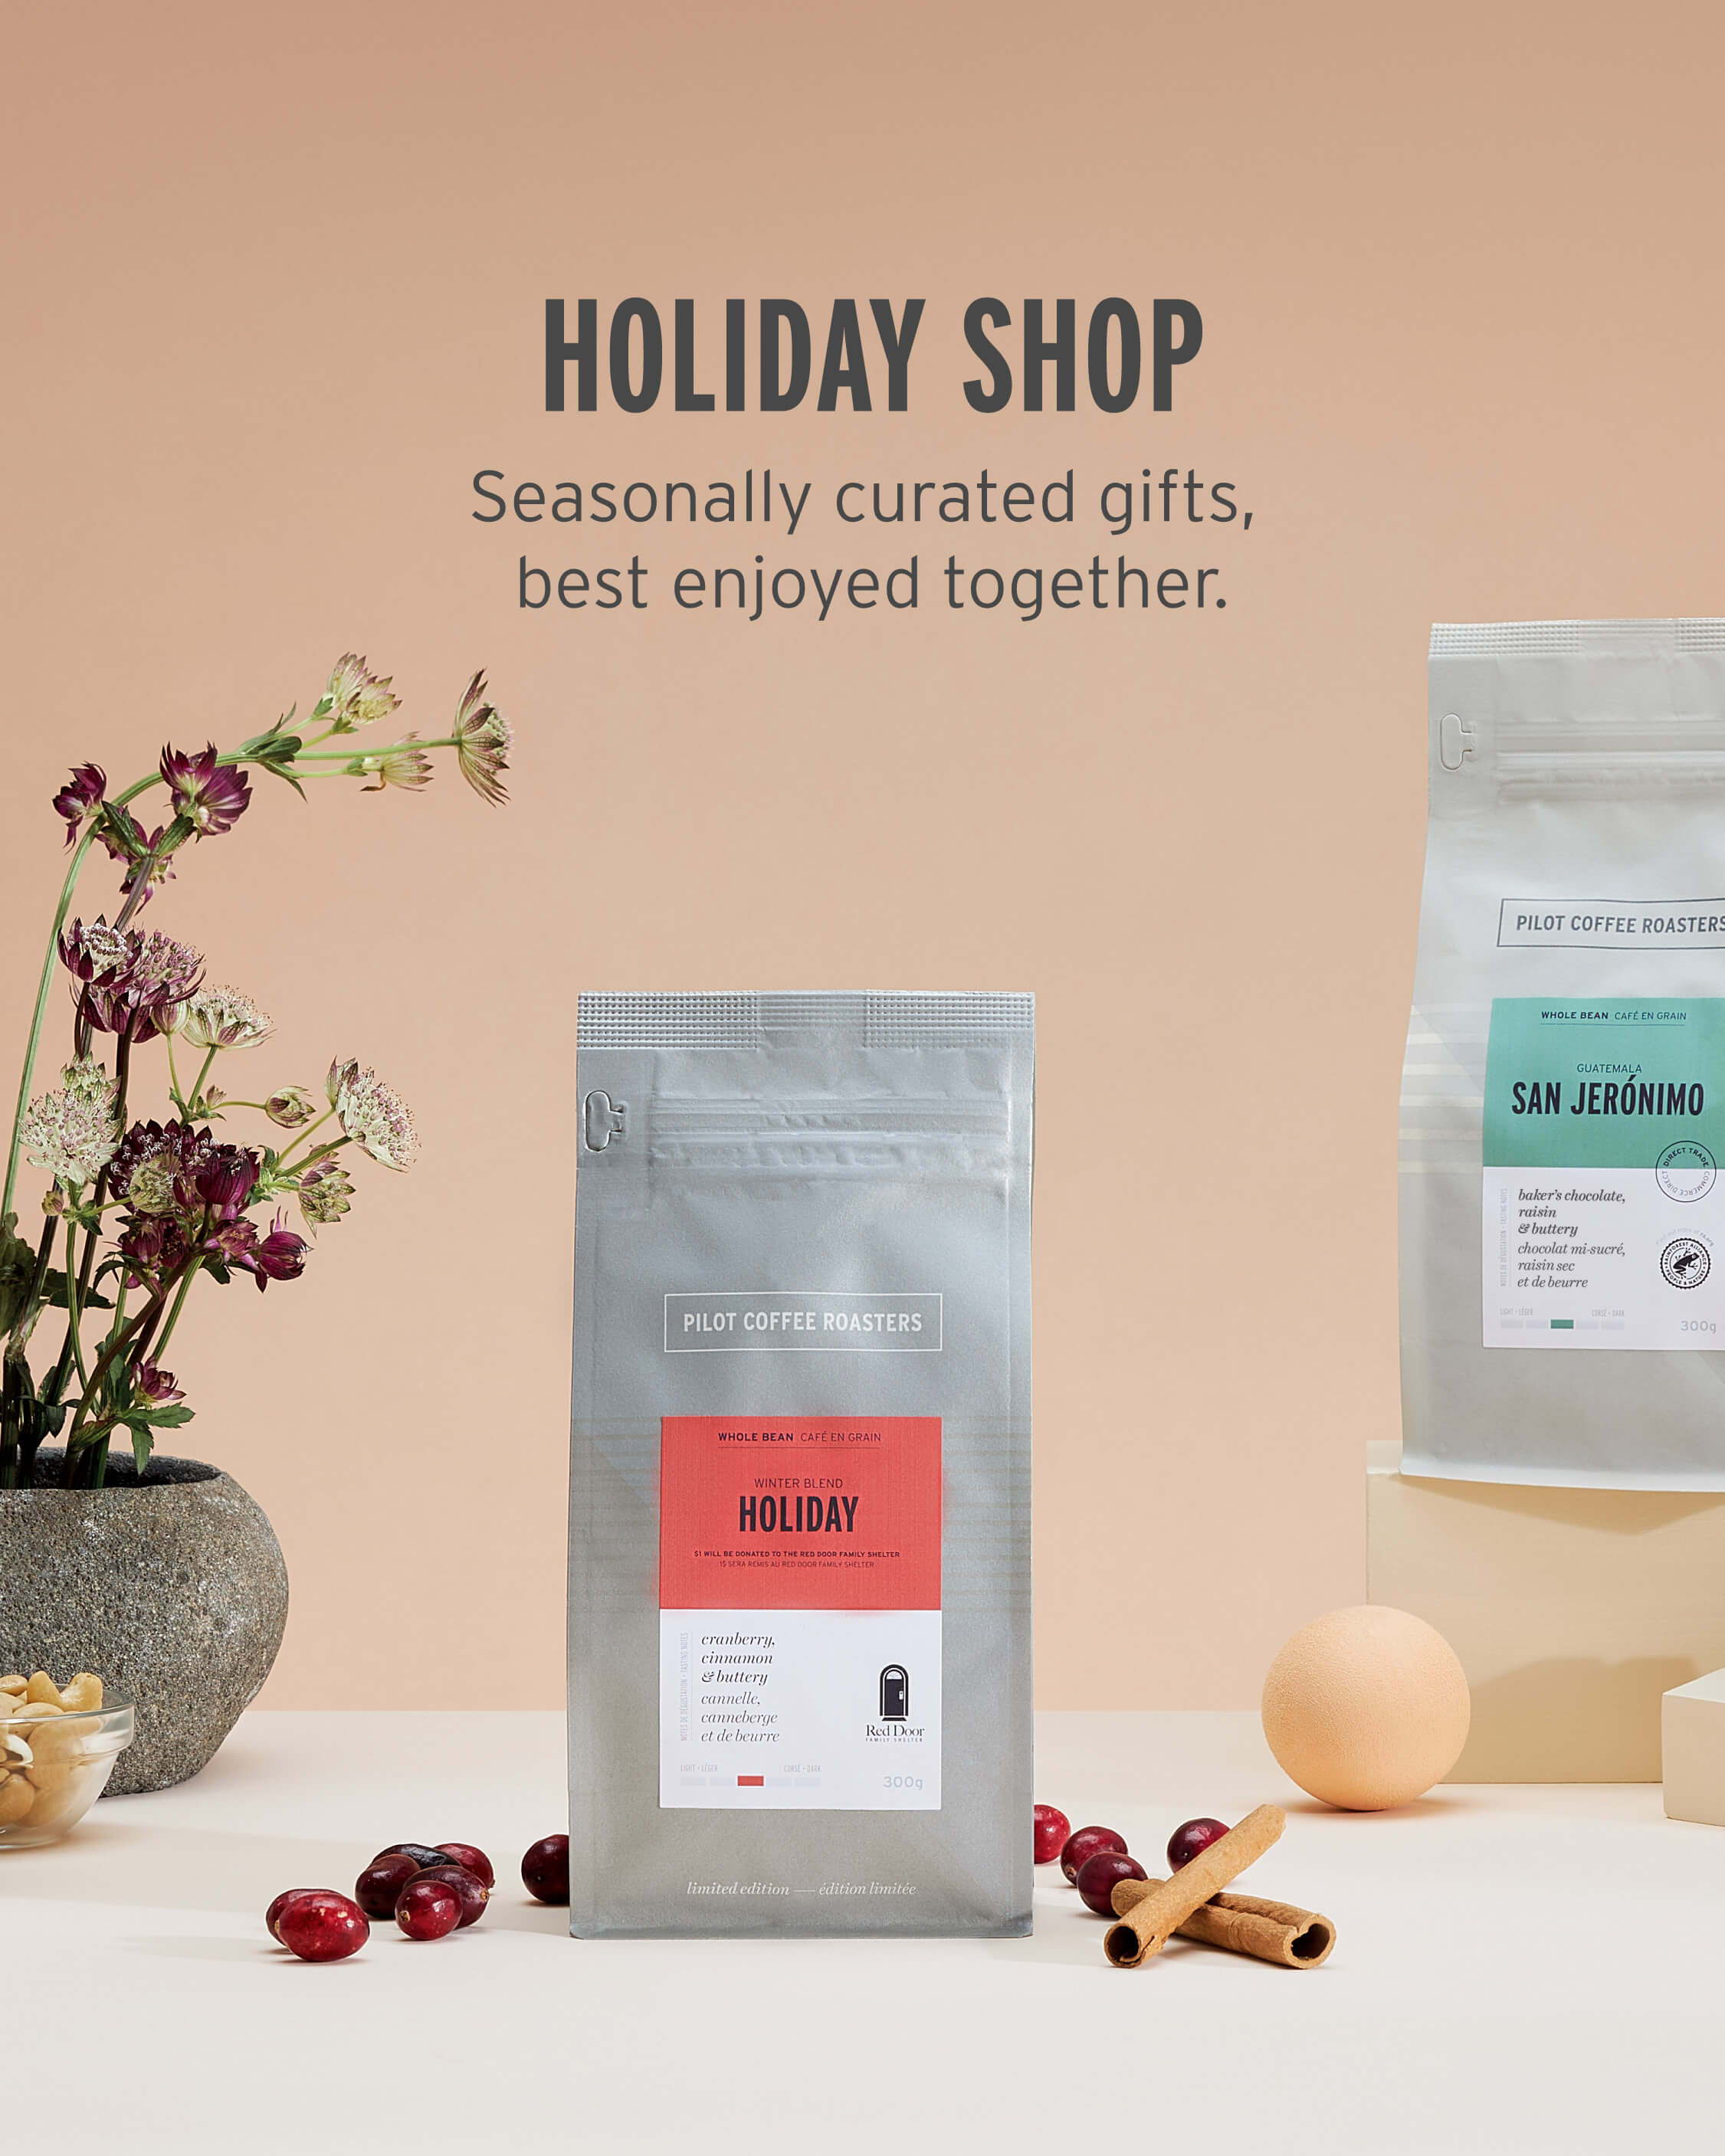 Holiday Shop/ Seasonally curated gifts, best enjoyed together.